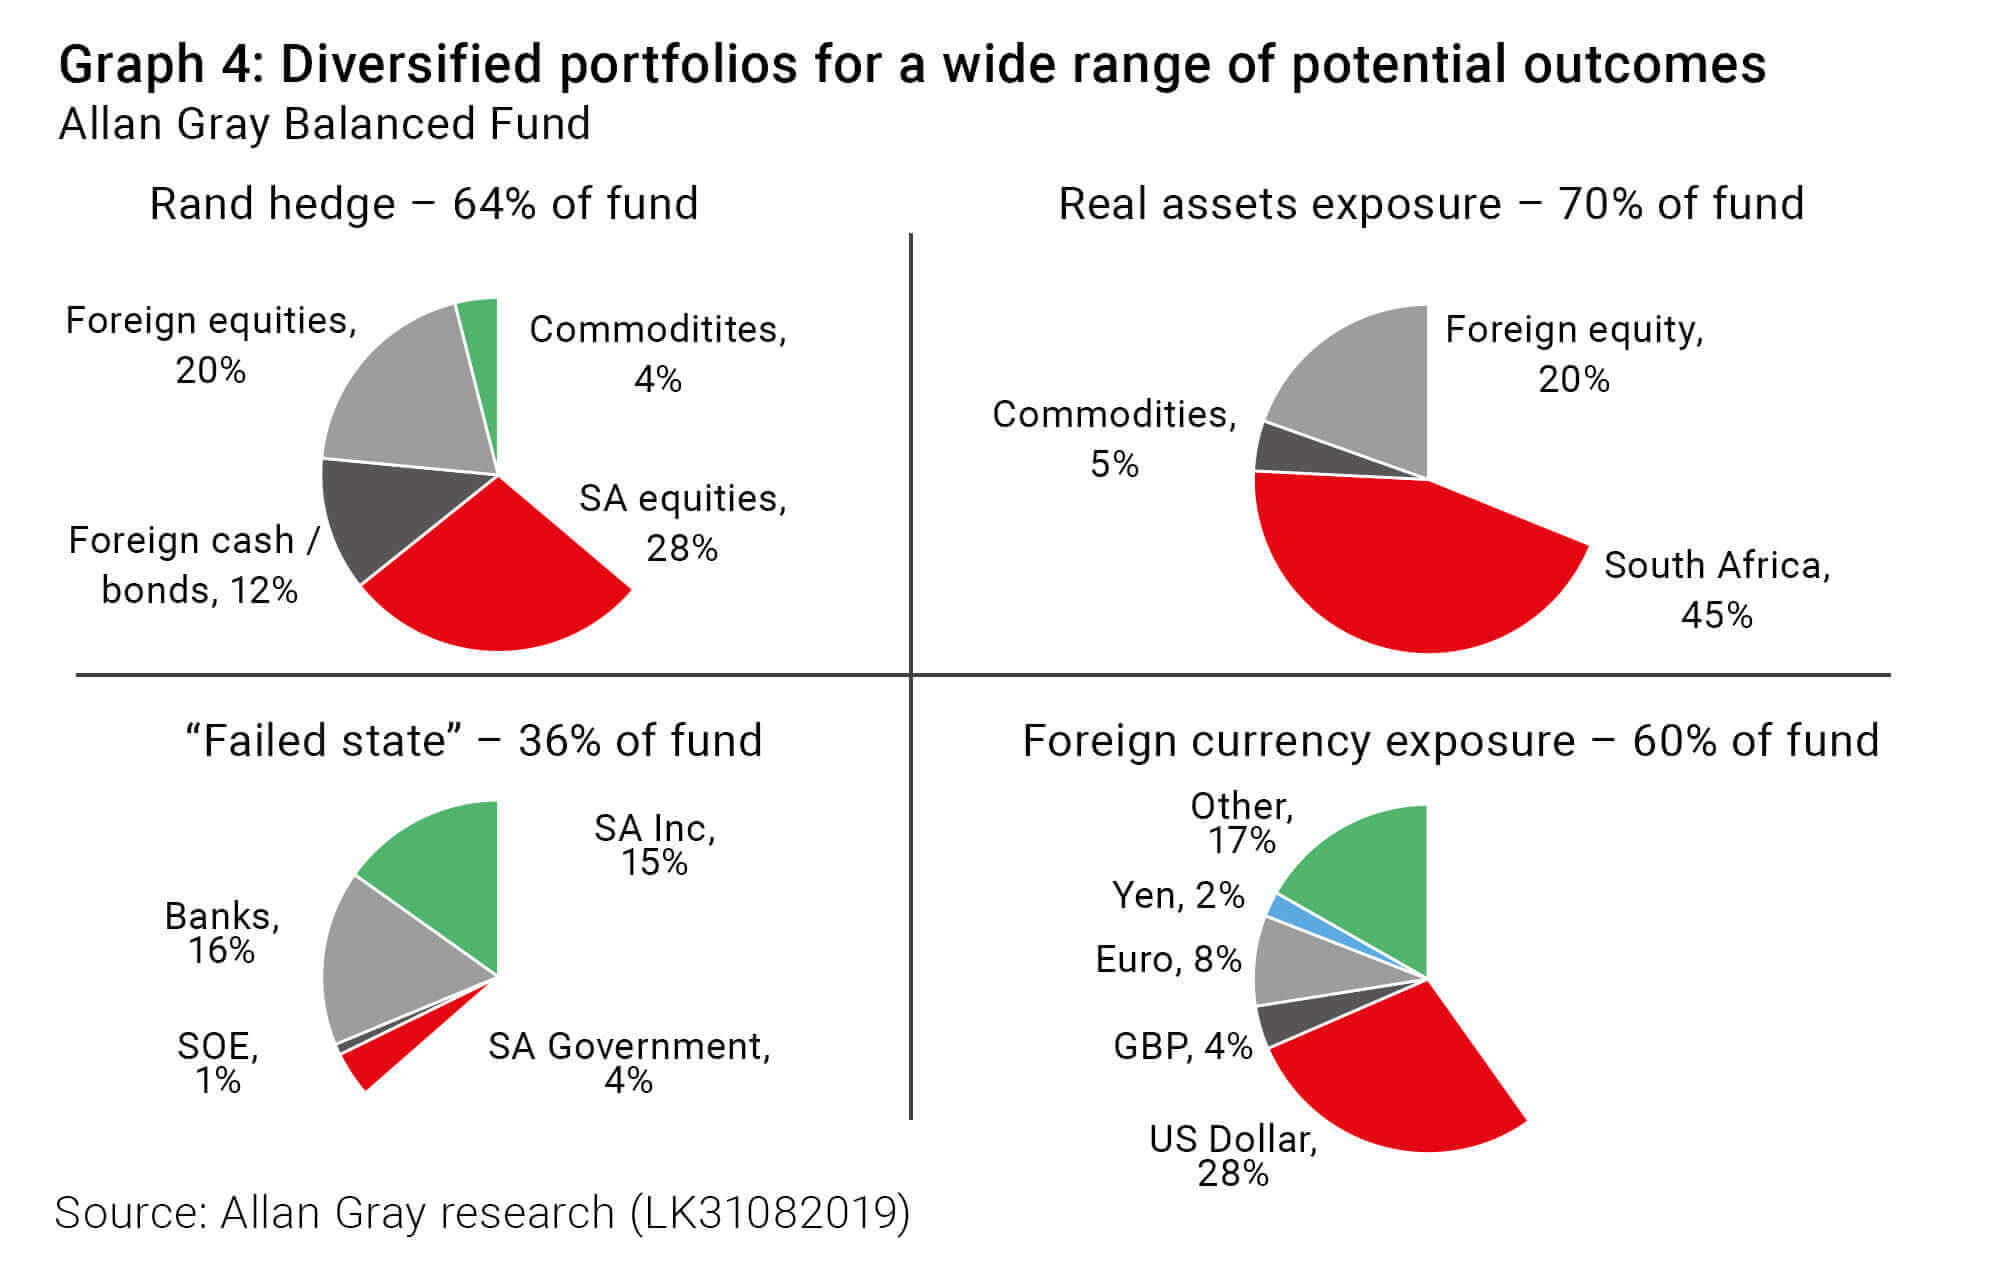 Allan Gray Balanced Fund - Diversified portfolios for a wide range of potential outcomes 